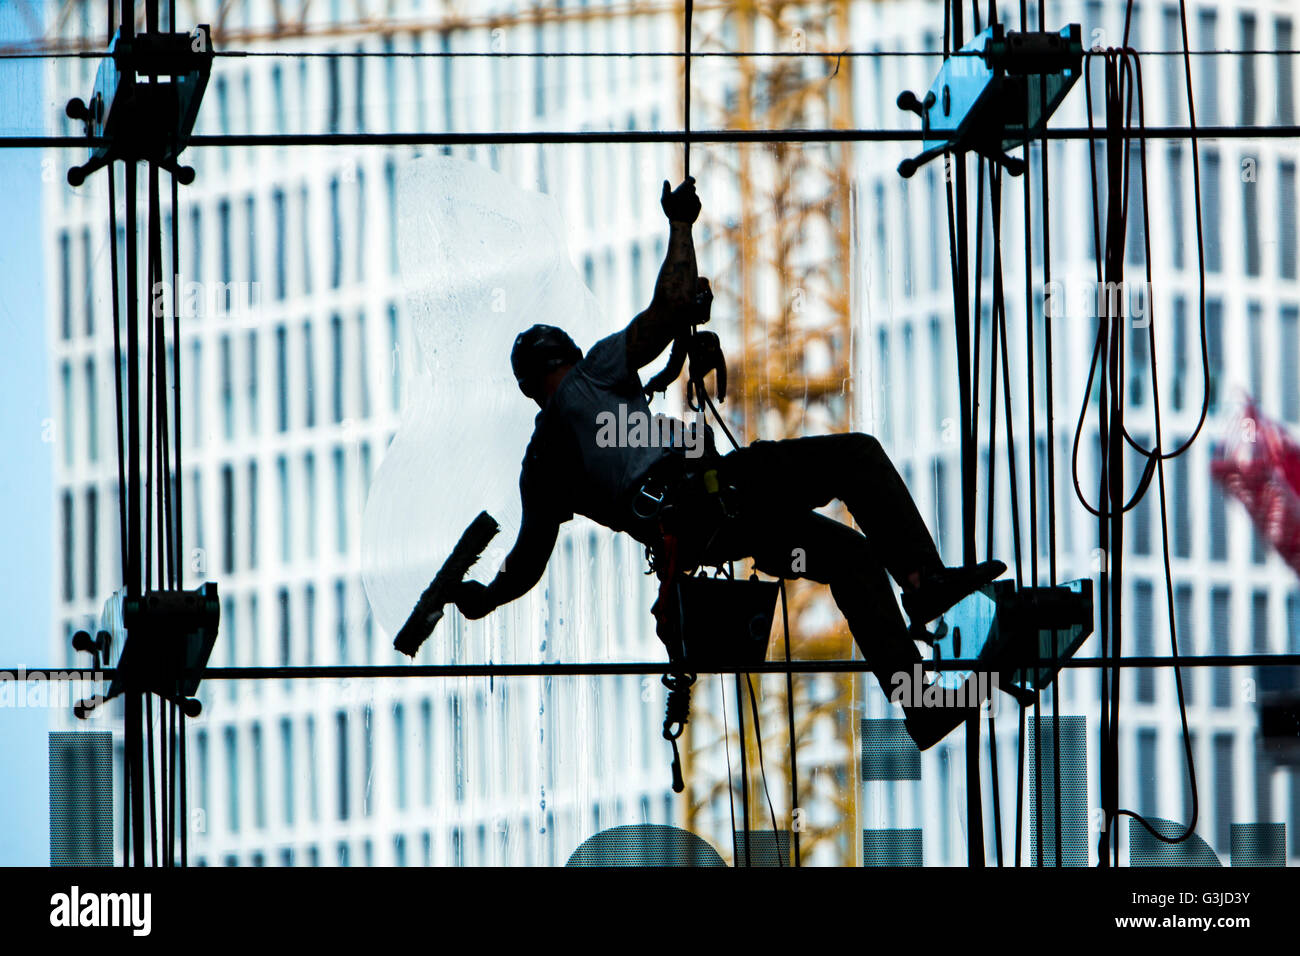 Window cleaner, hanging on rope, cleans a large glass facade, industrial climbers, Stock Photo